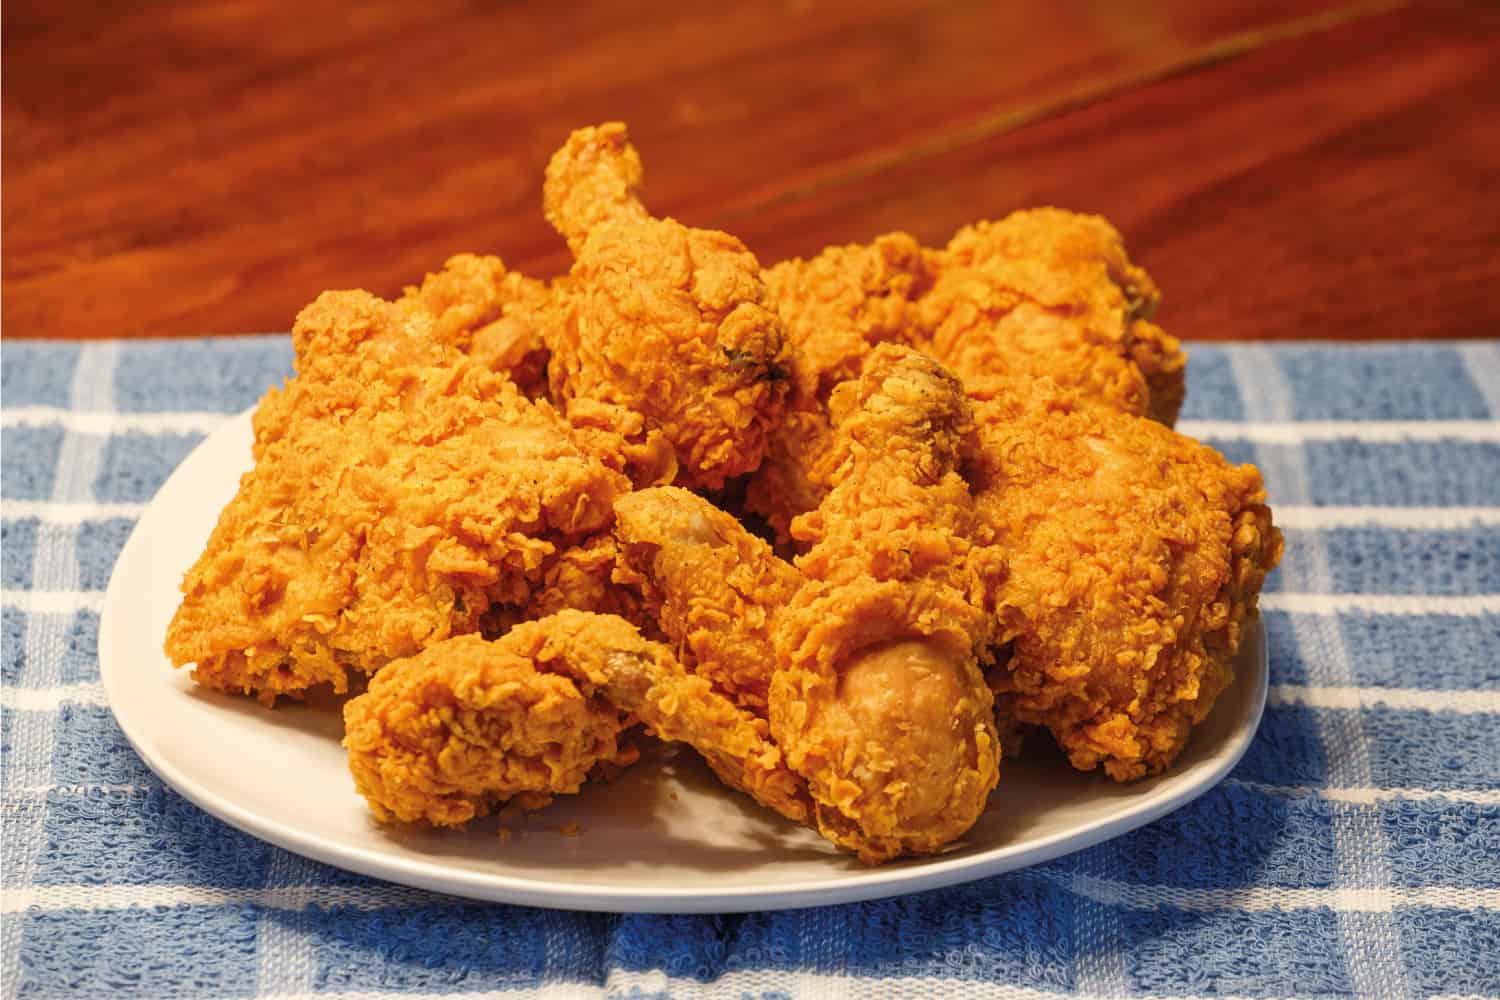 A Plate of Fresh Fried Chicken on Blue Plaid Placemat